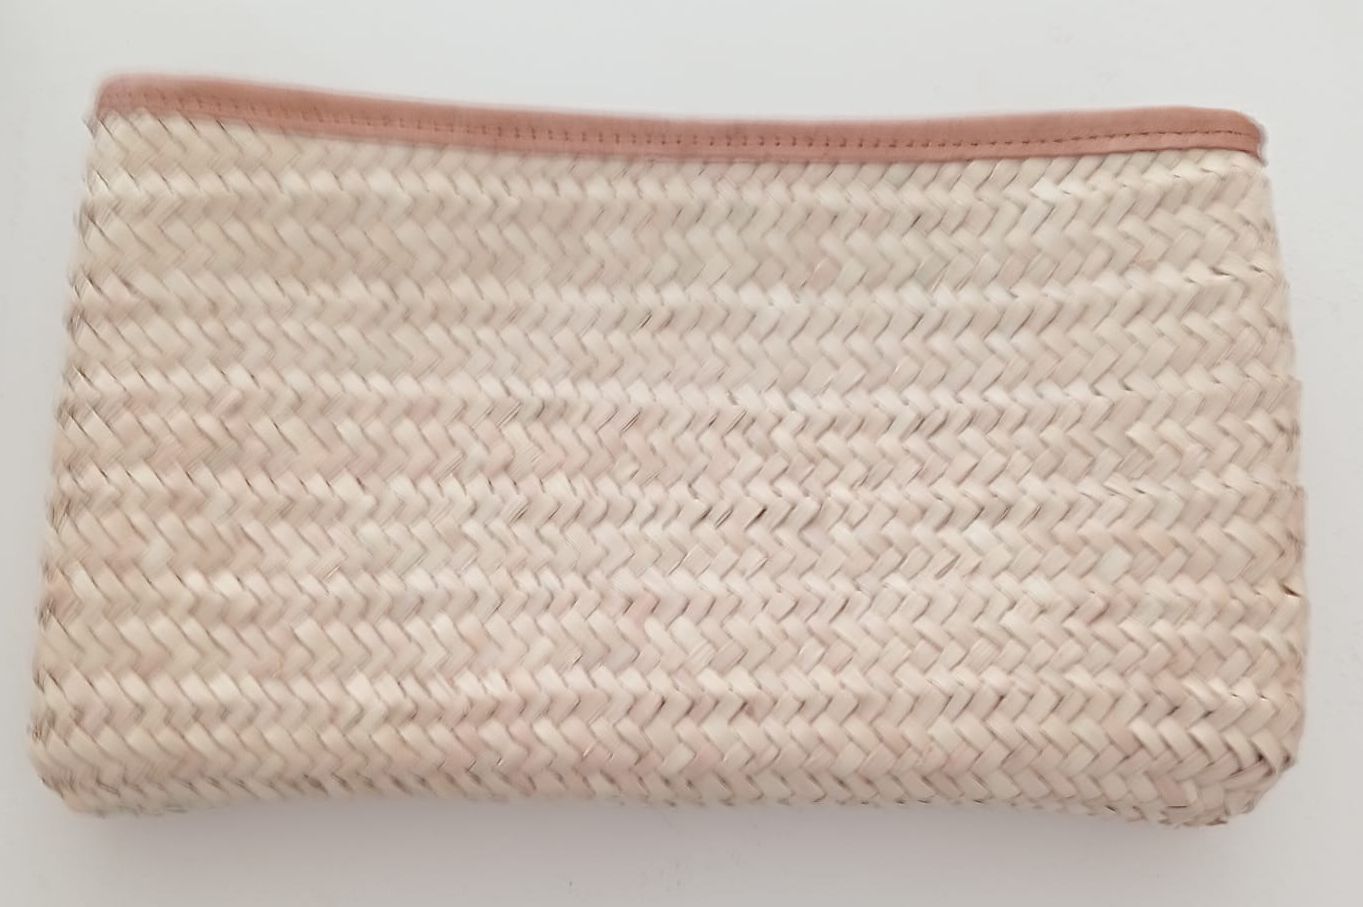 Rectangular clutch hand made and woven in palm leaves with wool embroidery, Golden Shell motif